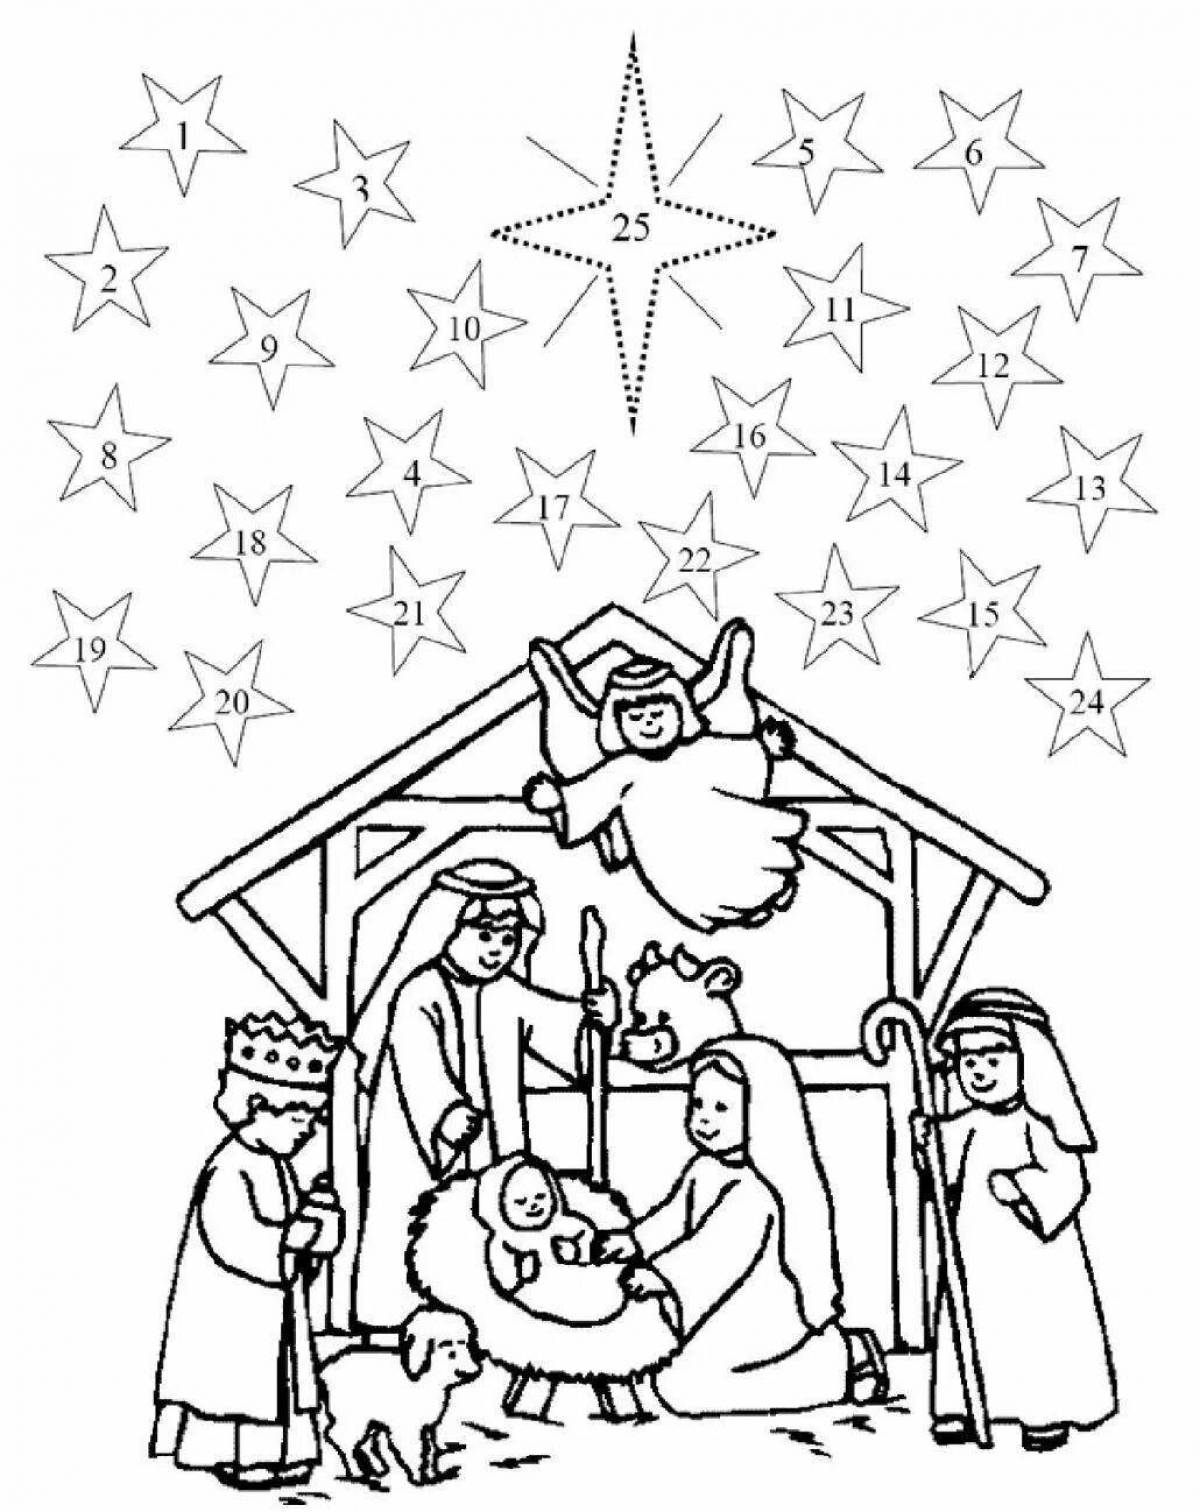 Blessed Christmas coloring book for kids